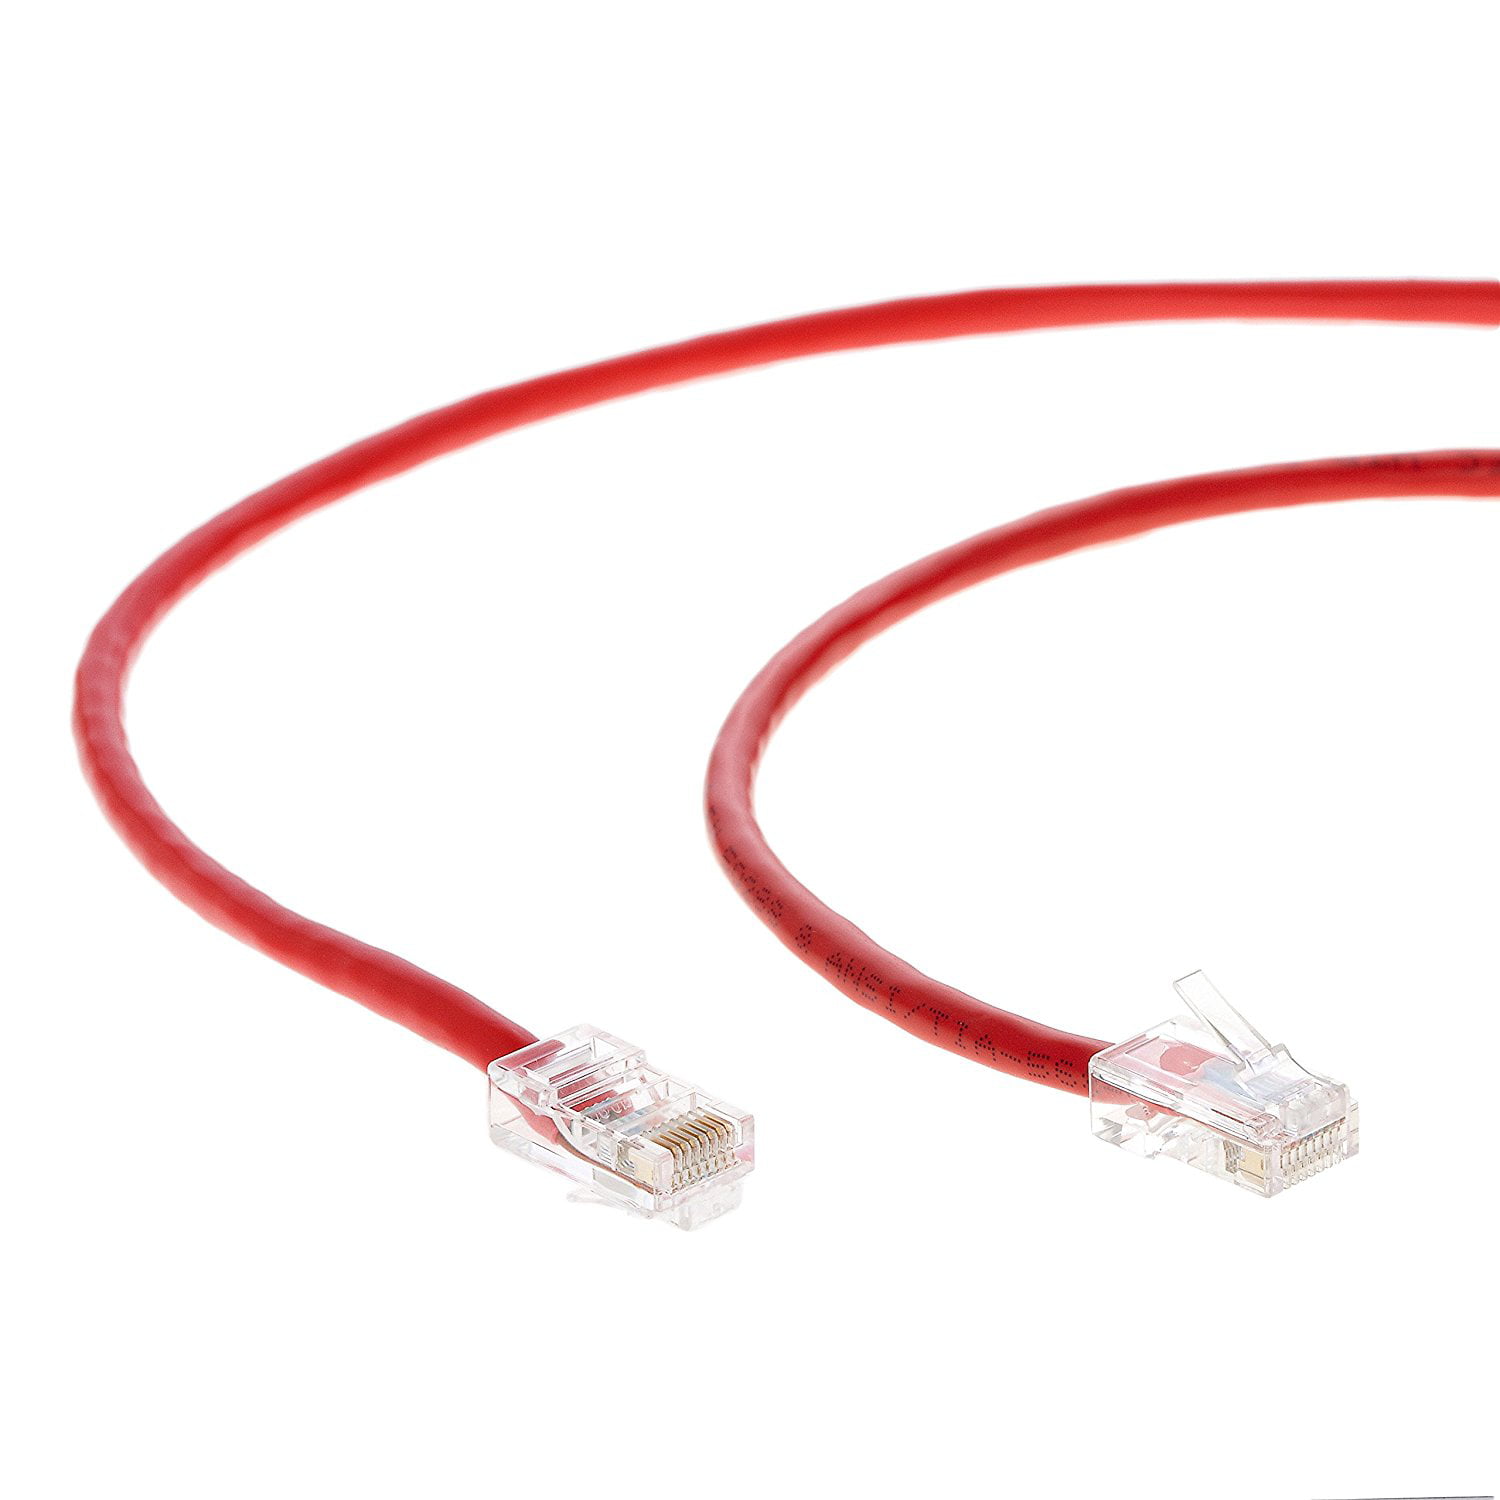 Professional Series Red 550MHZ 10Gigabit/Sec Network/High Speed Internet Cable 100 Pack Ethernet Cable CAT6 Cable UTP Non-Booted 0.5 FT InstallerParts 